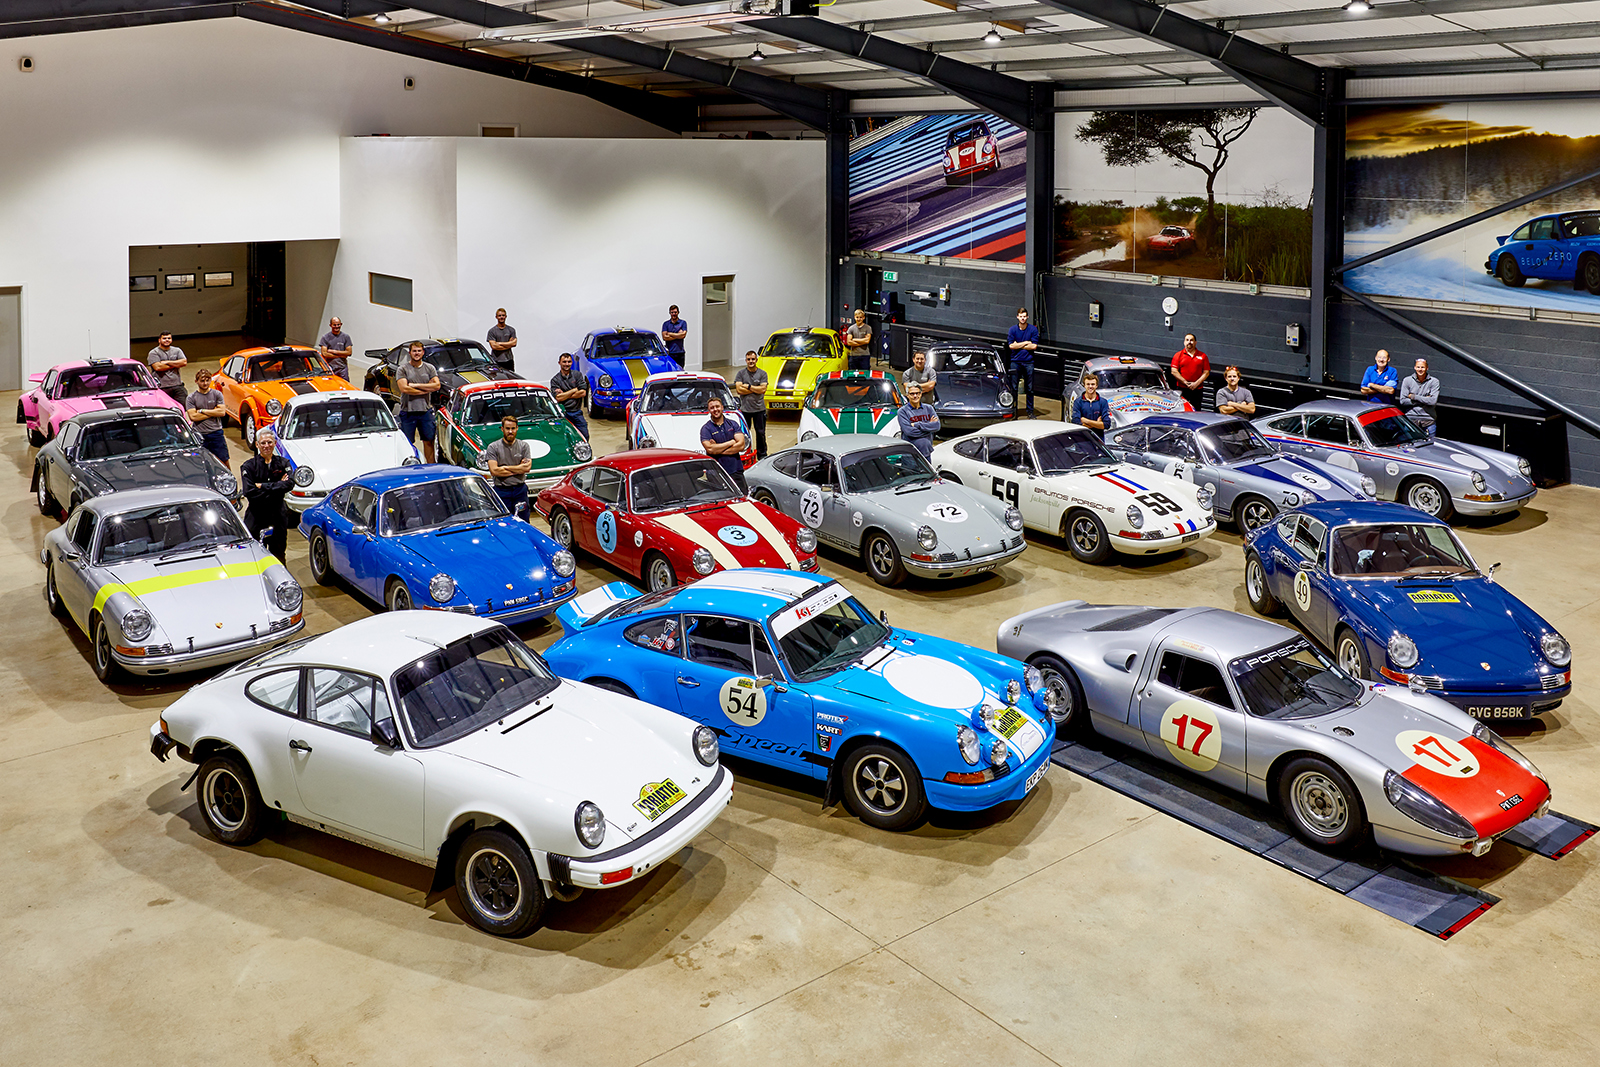 Seasons Greetings from Tuthill Porsche